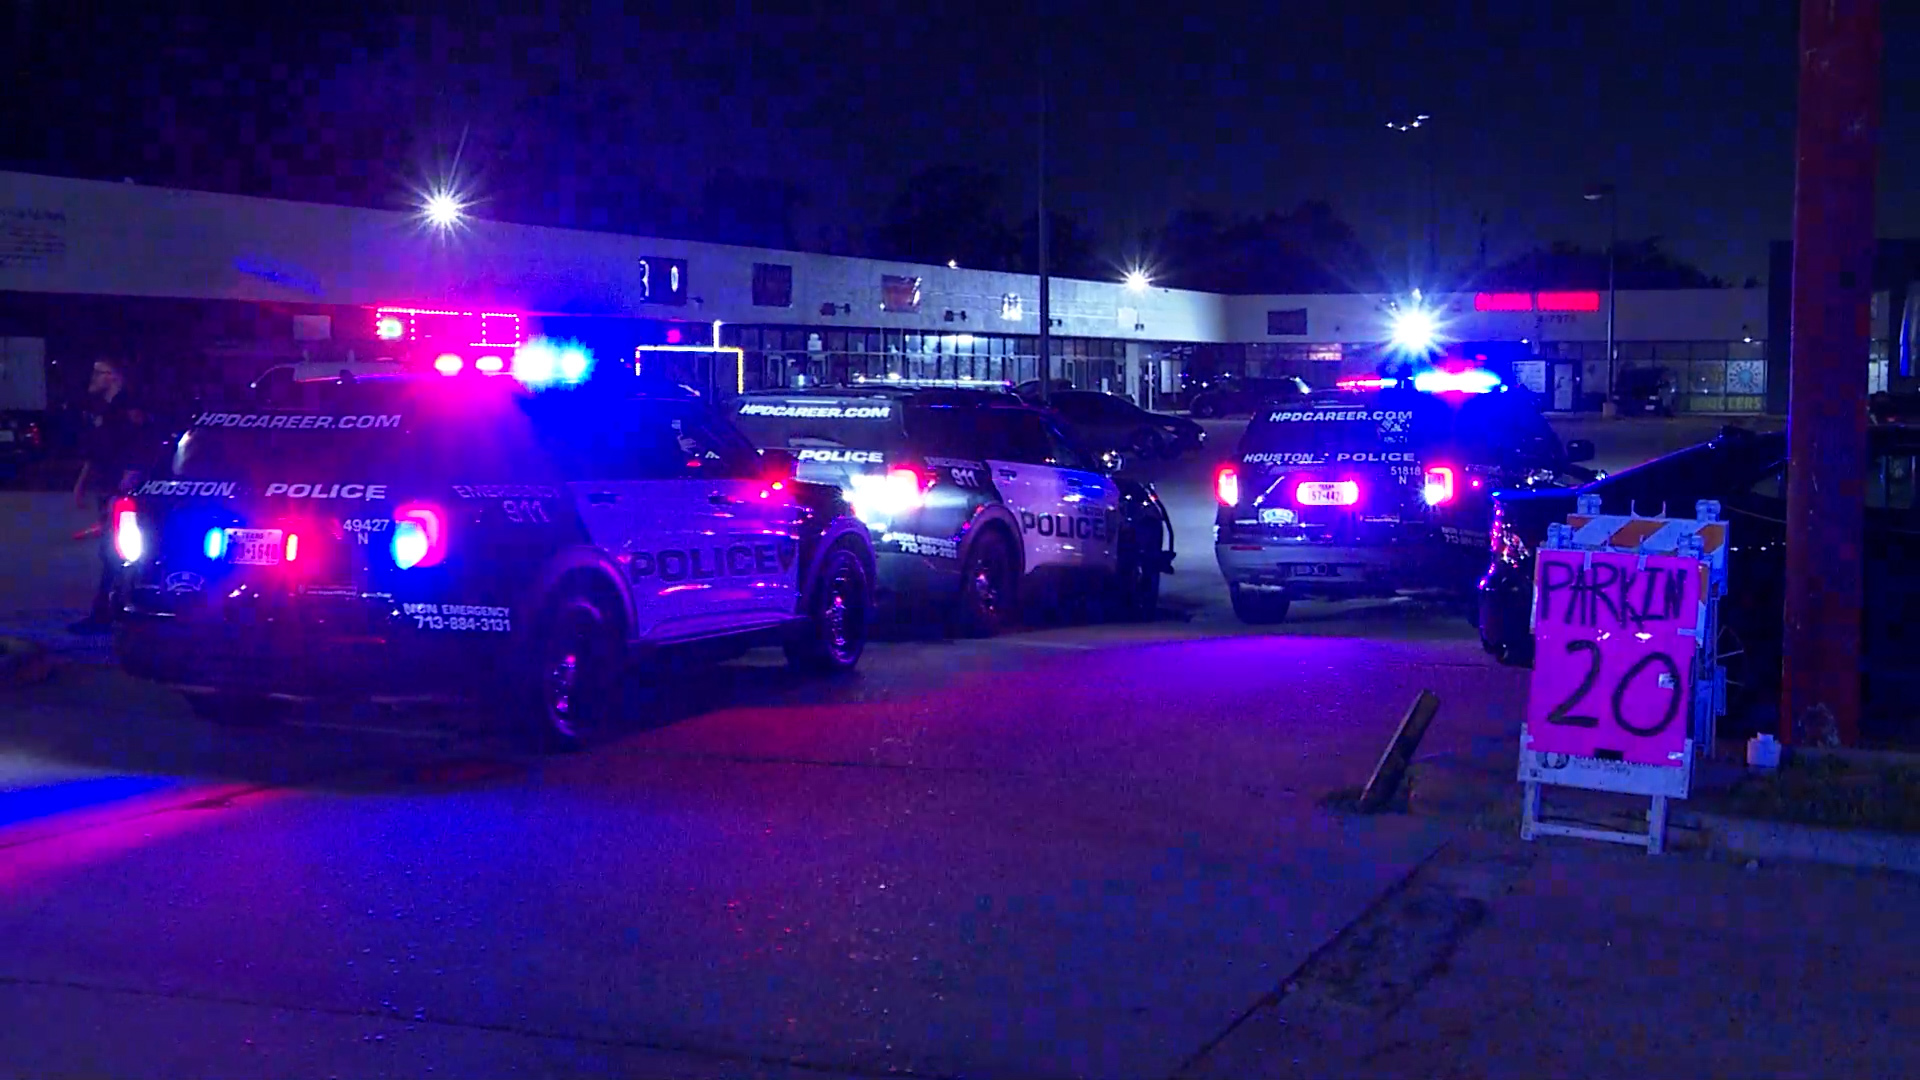 A security guard at an apparent unlicensed nightclub in north Houston accidentally fired a shotgun he was handling, hitting two women, police said.